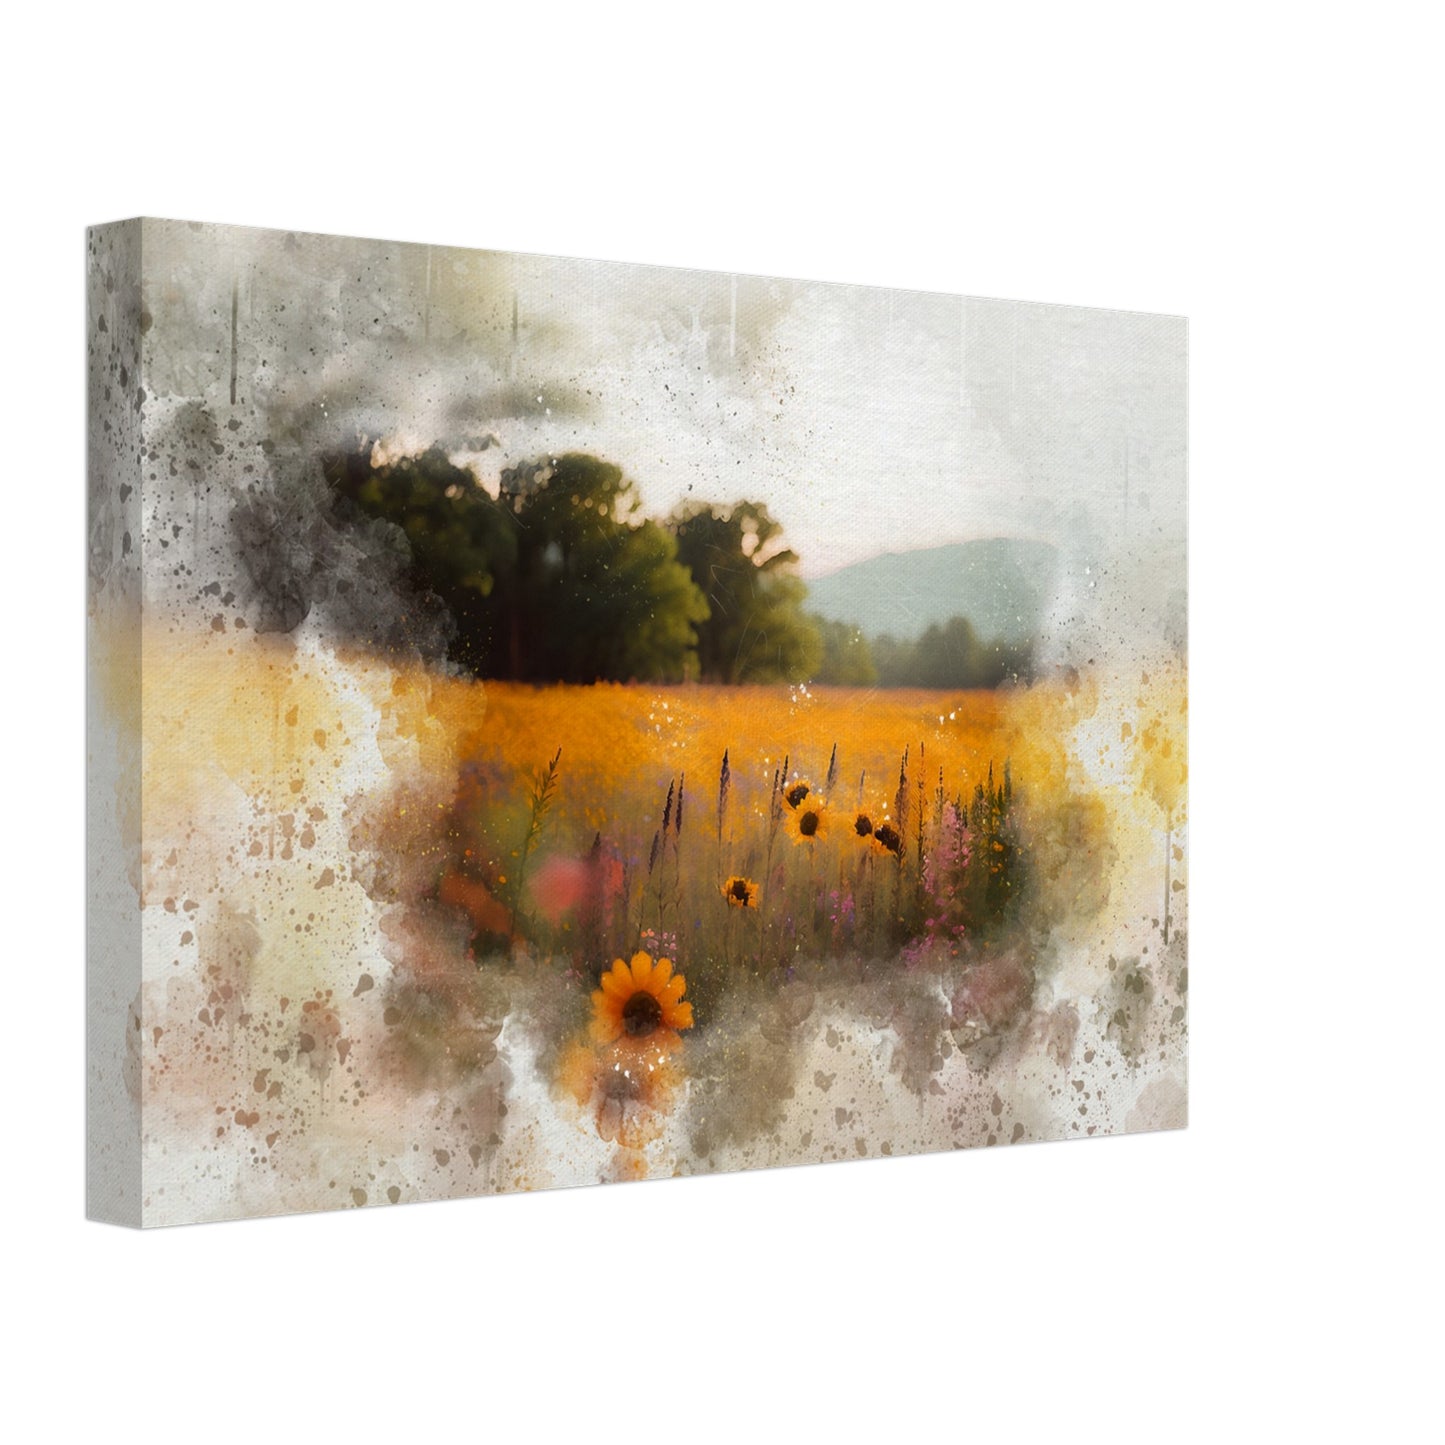 WILDFLOWERS AT DUSK | Gallery Wrapped Canvas Botanical Art